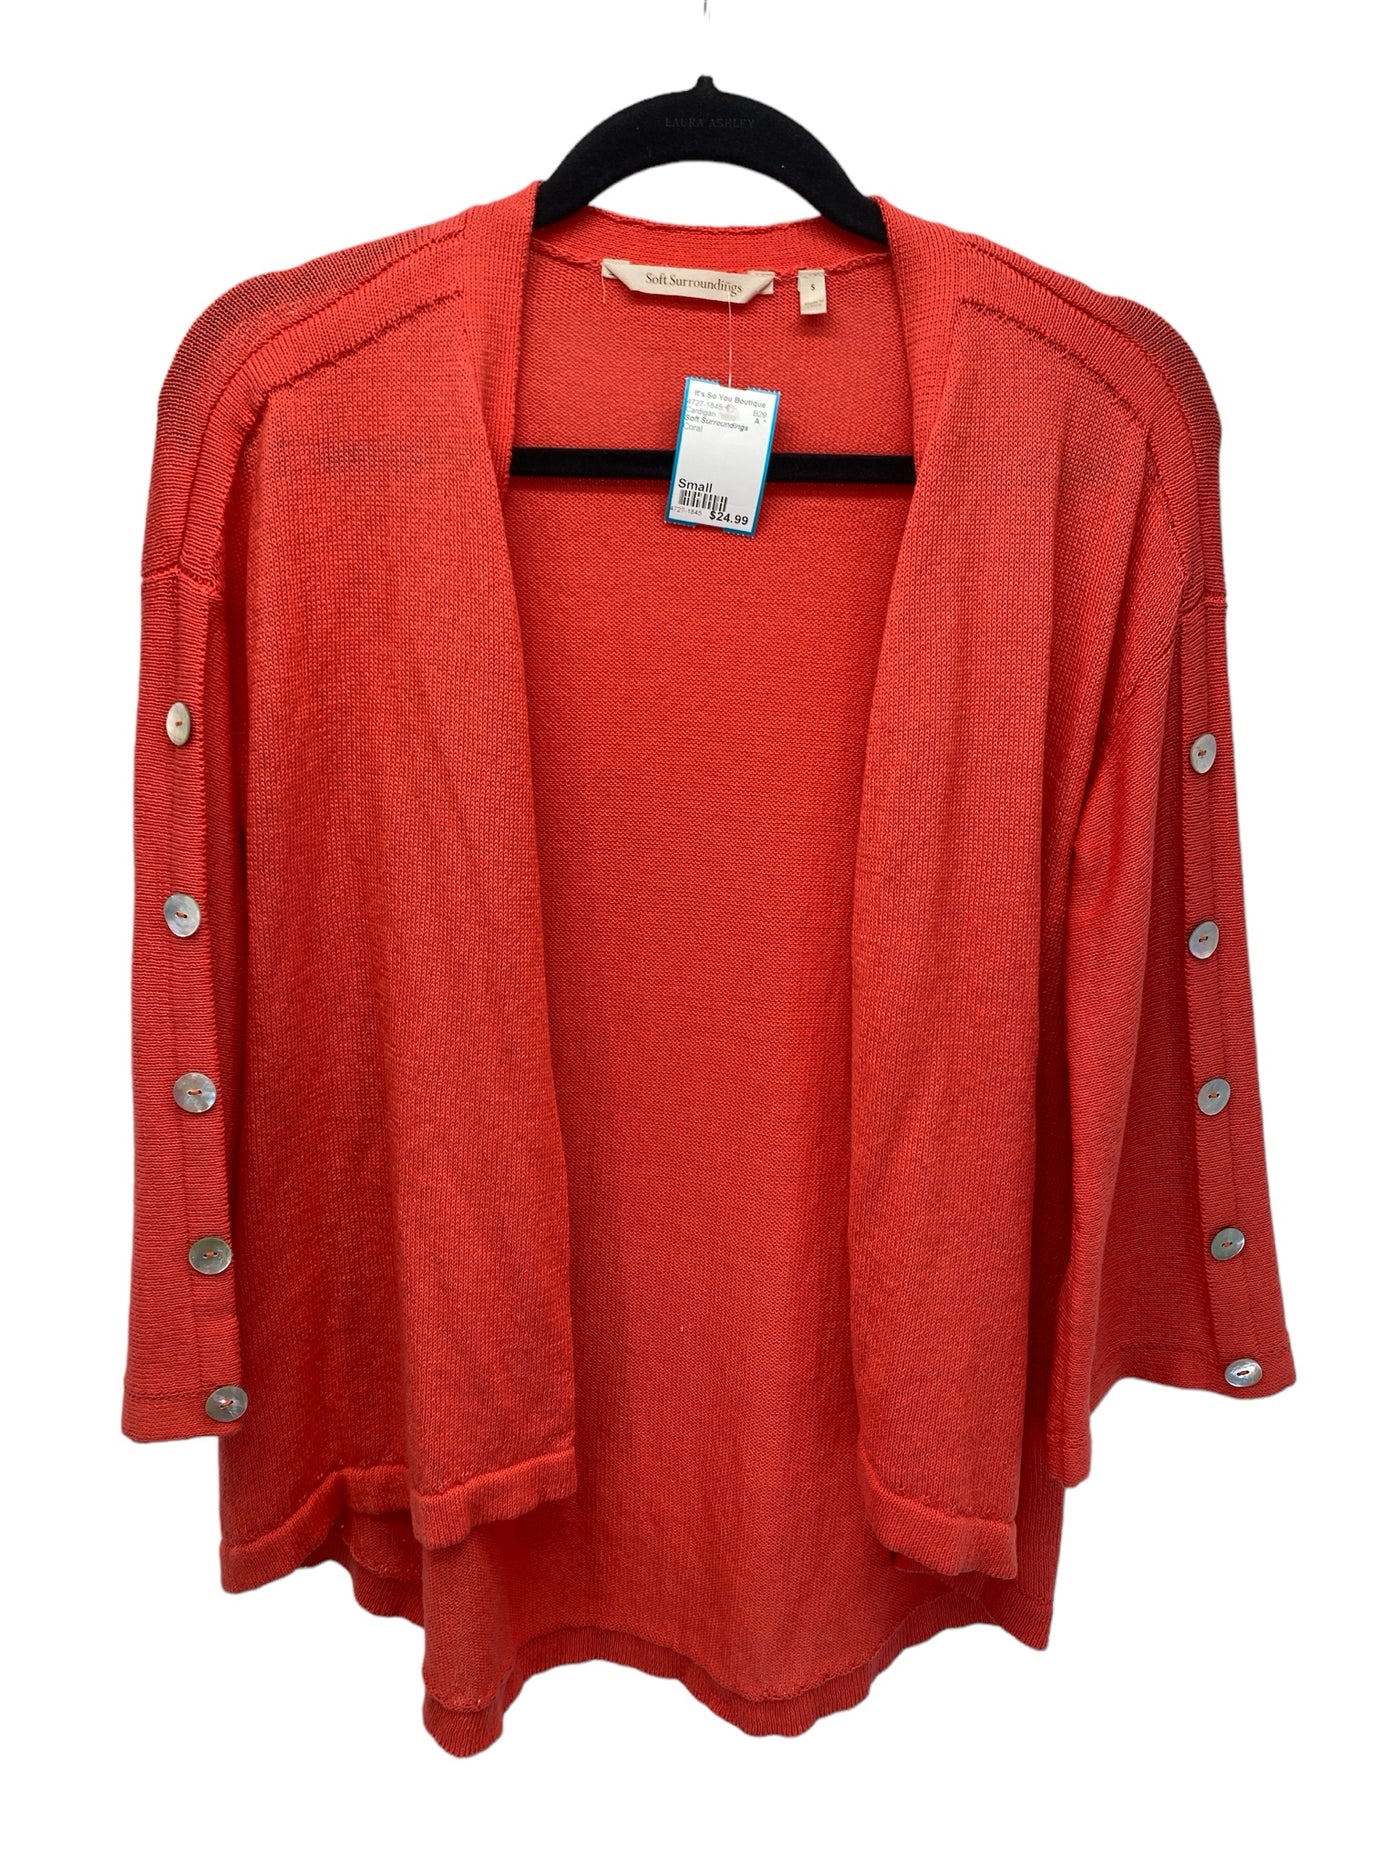 Soft Surroundings Misses Size Small Coral Cardigan